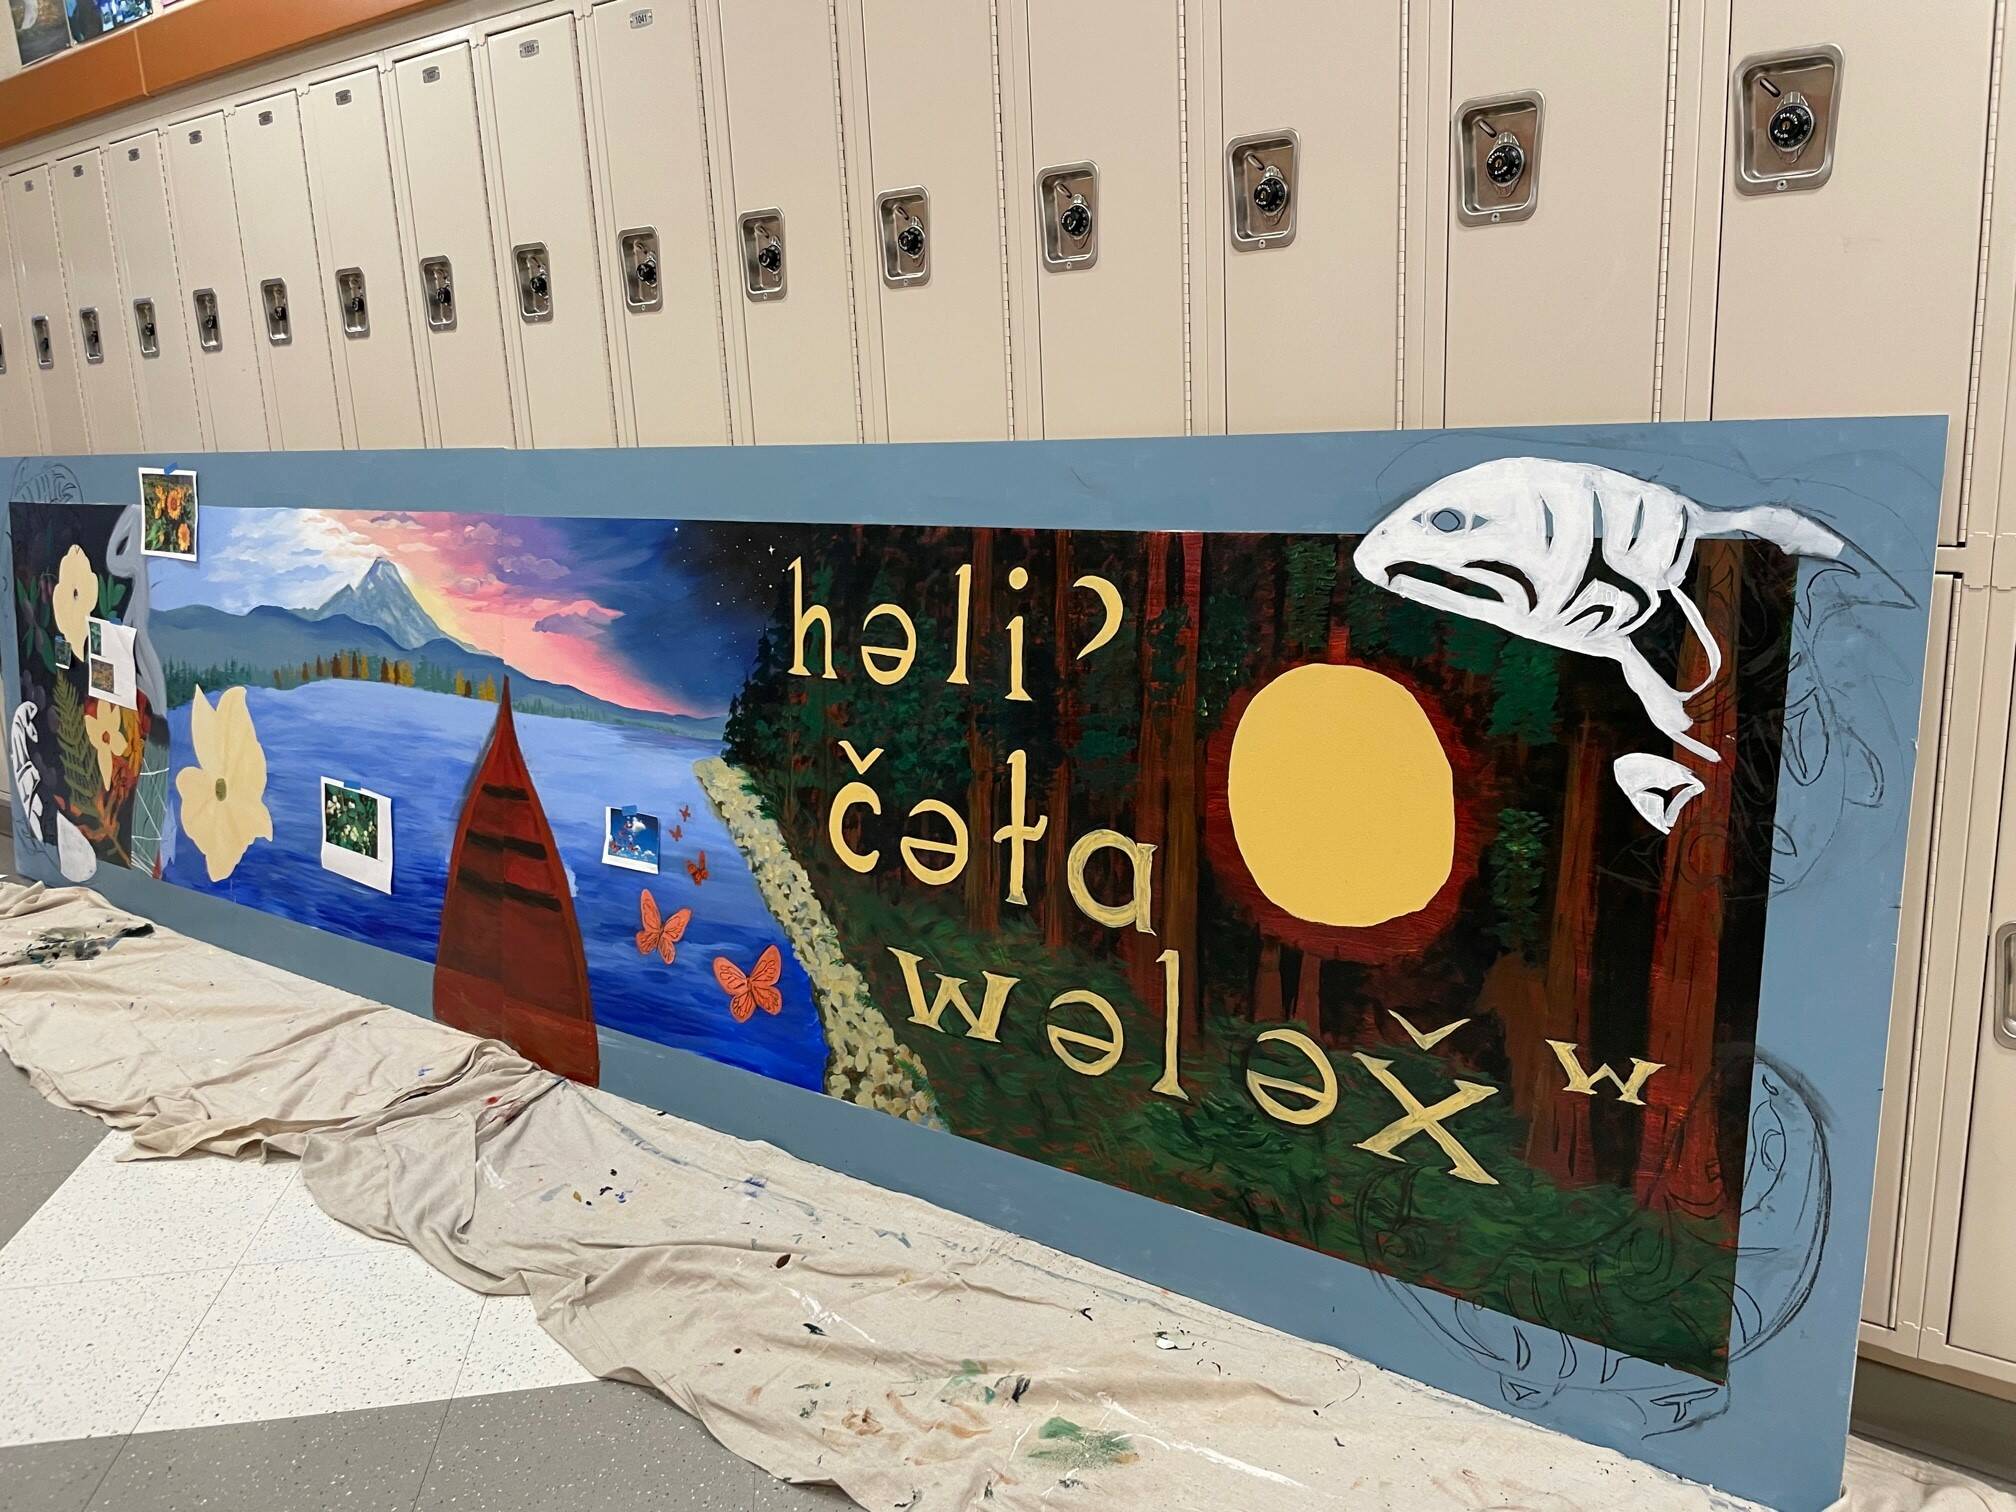 Photos courtesy of Auburn School District
Elisabeth Ronley, an art teacher at Auburn High School, secured a grant to paint a mural titled “We Are Alive and Strong” at the school. The mural includes many elements of Native American culture and history.